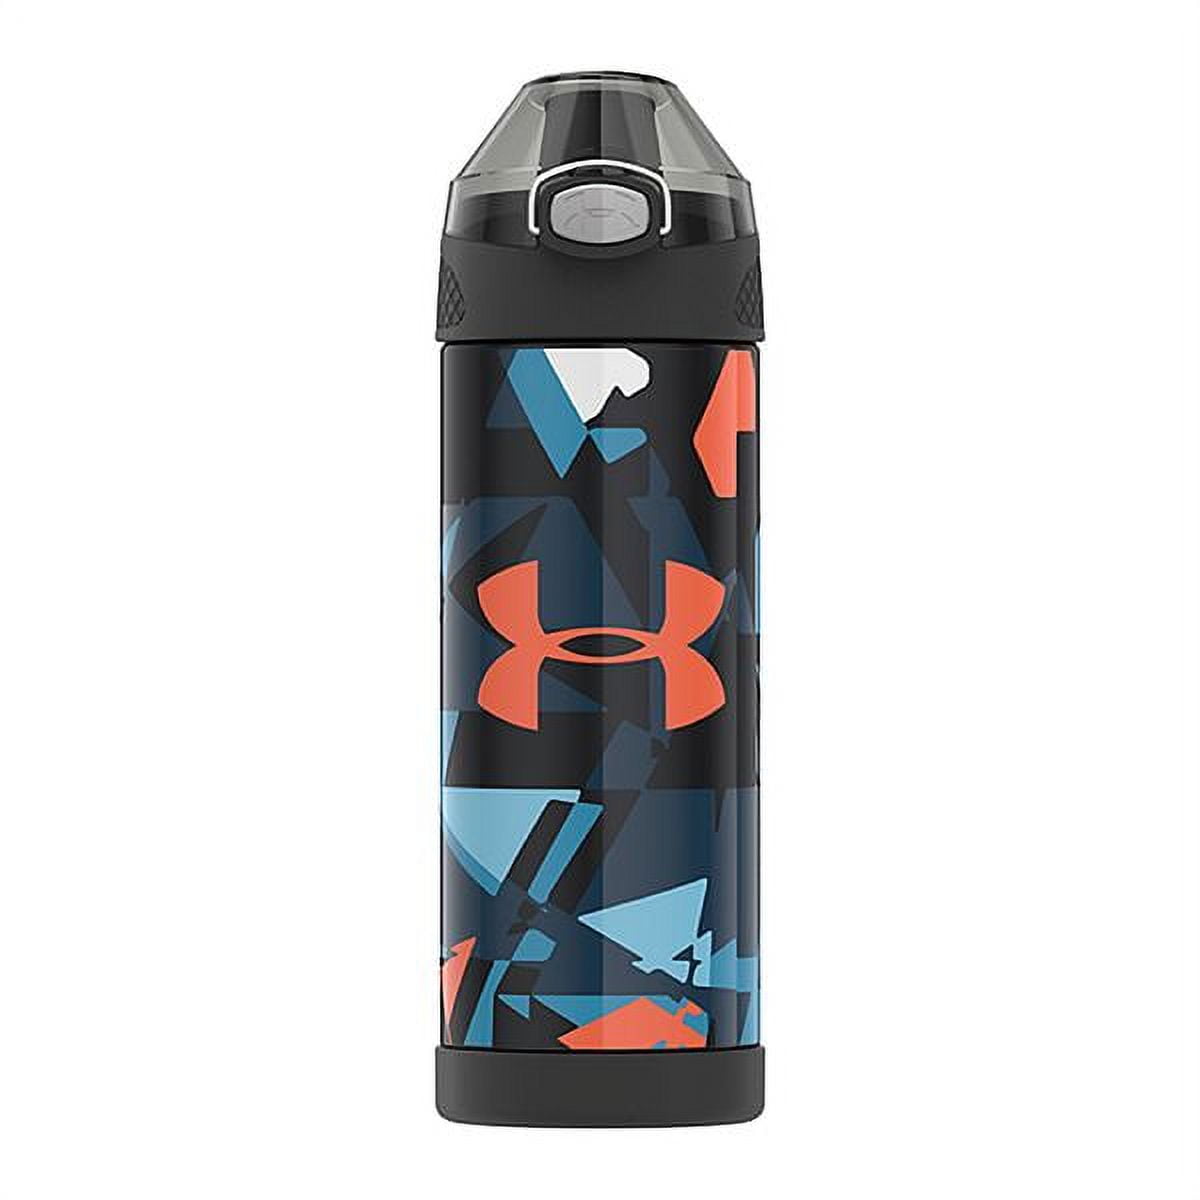 UNDER ARMOUR Peak 40 oz Metal Vacuum Insulated Thermos Bottle Green Camo NEW